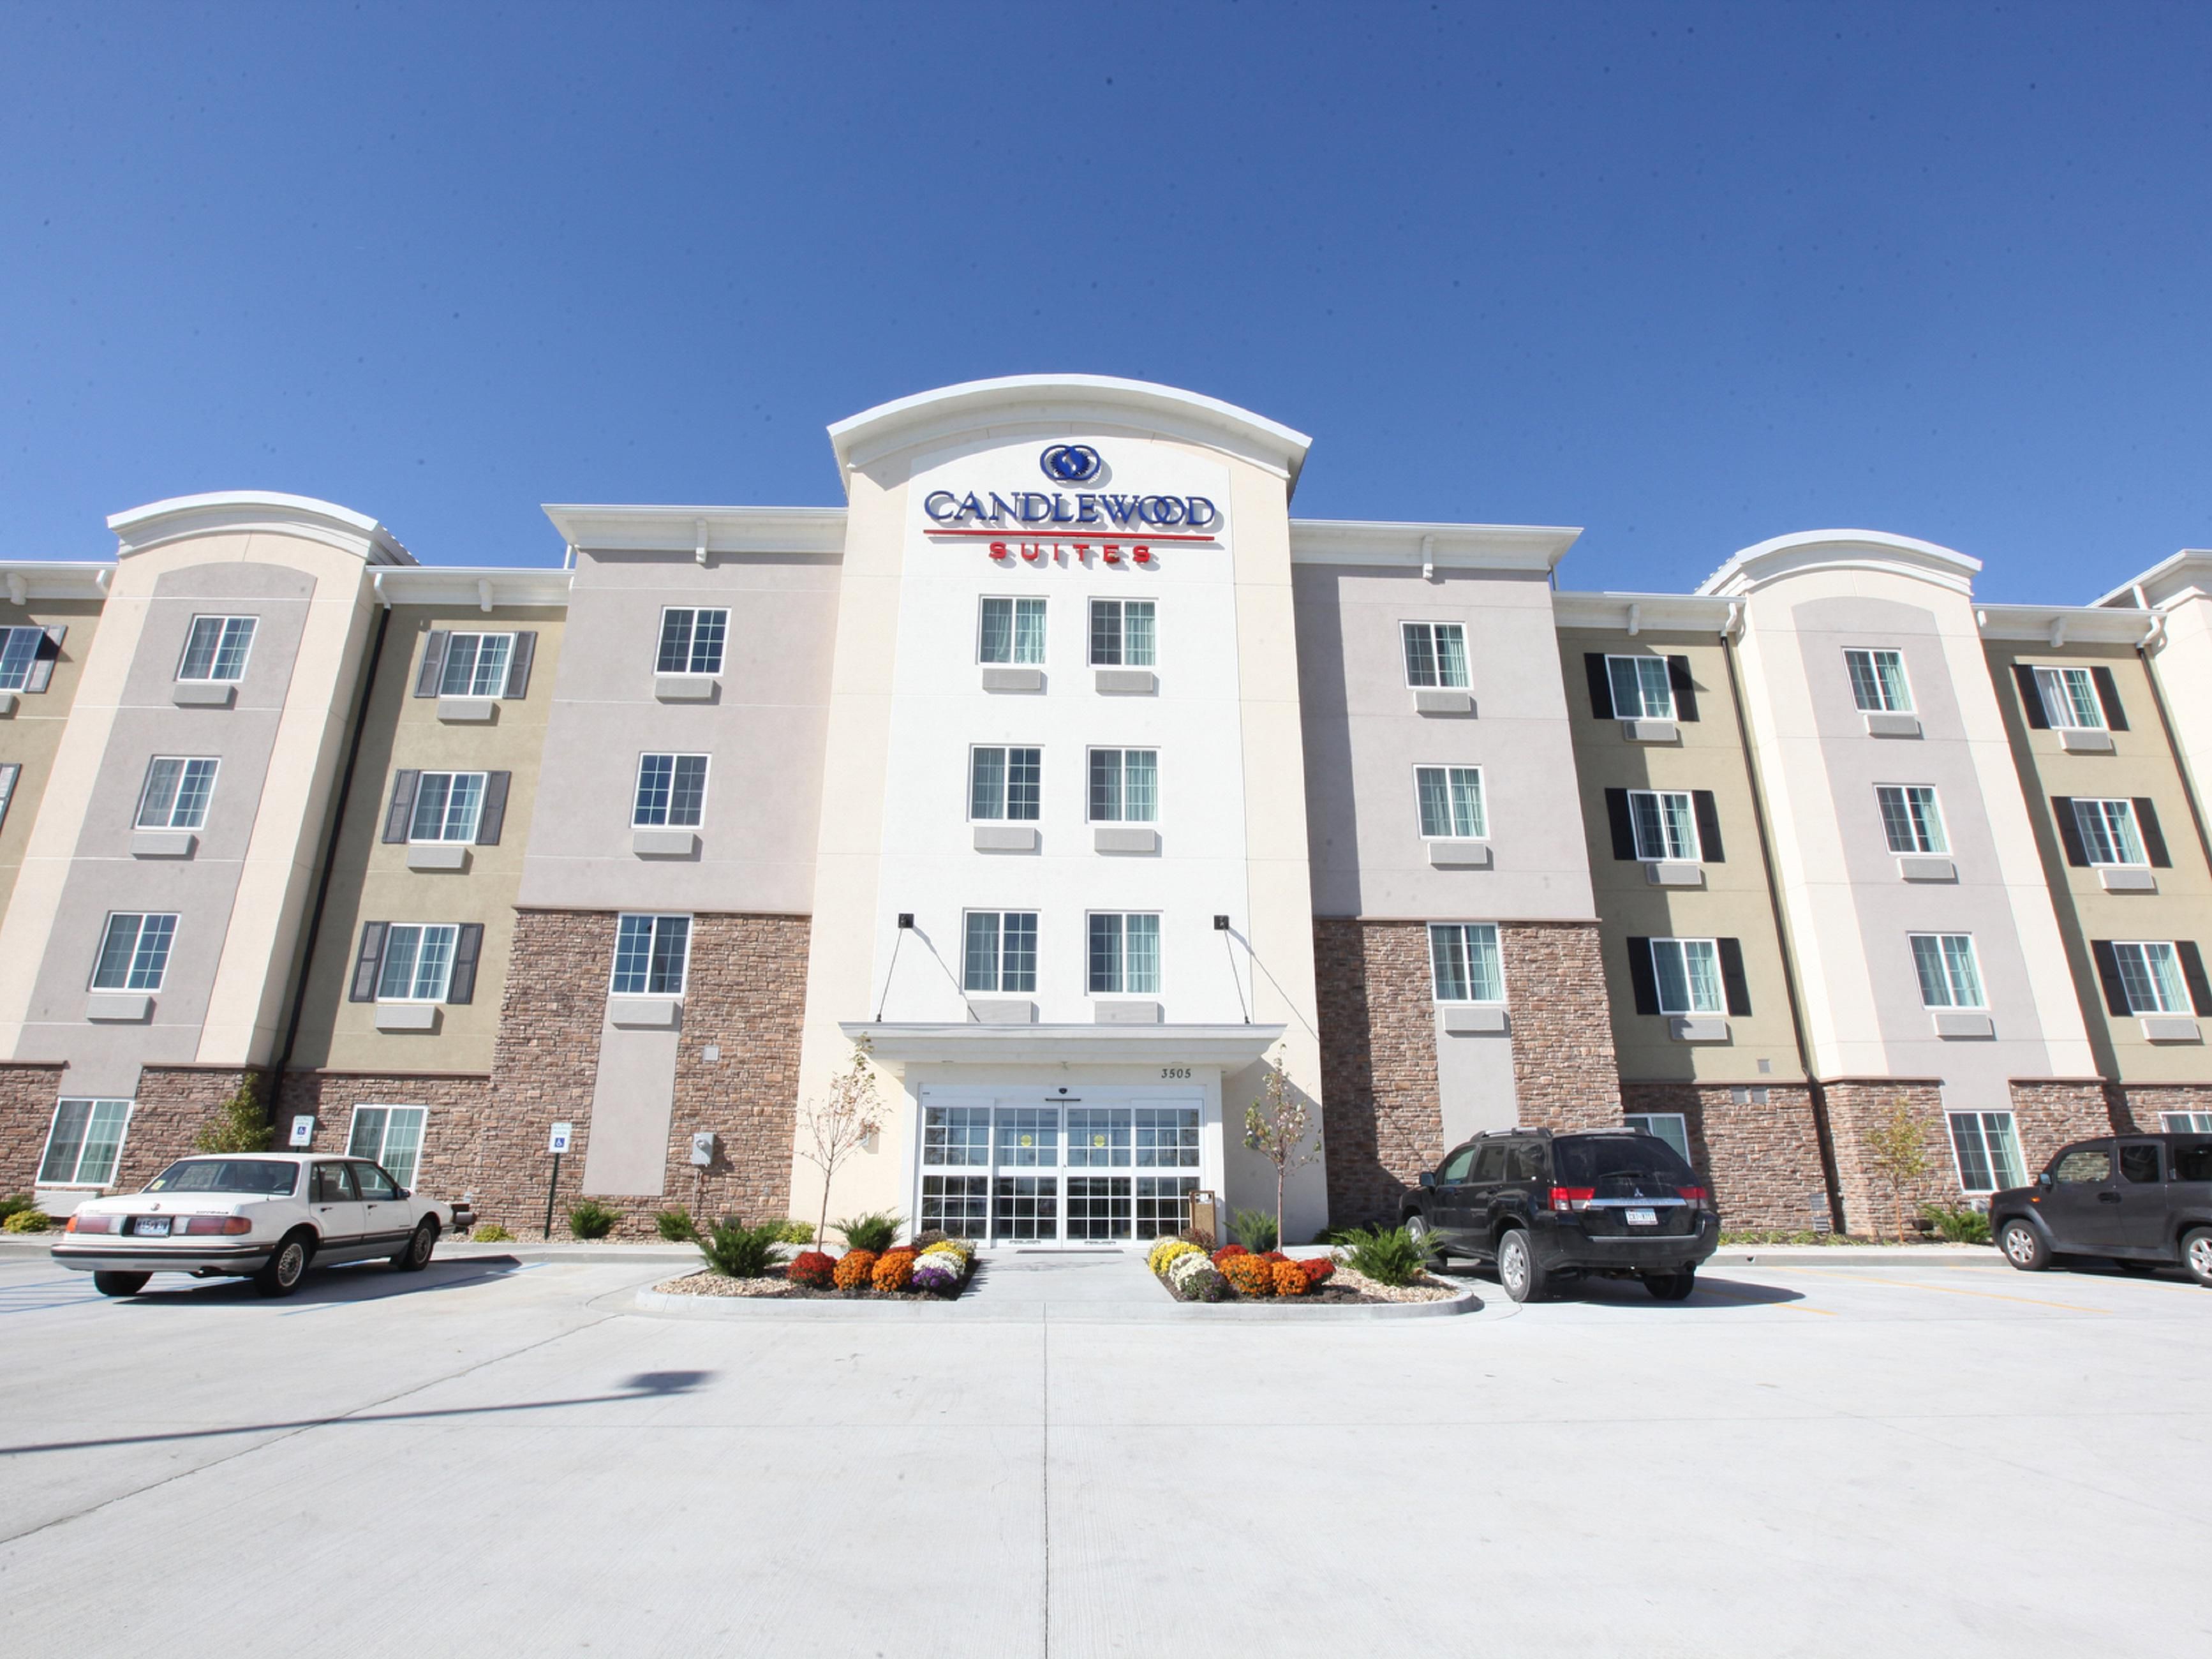 St Joseph Hotels Candlewood Suites St Joseph Extended Stay